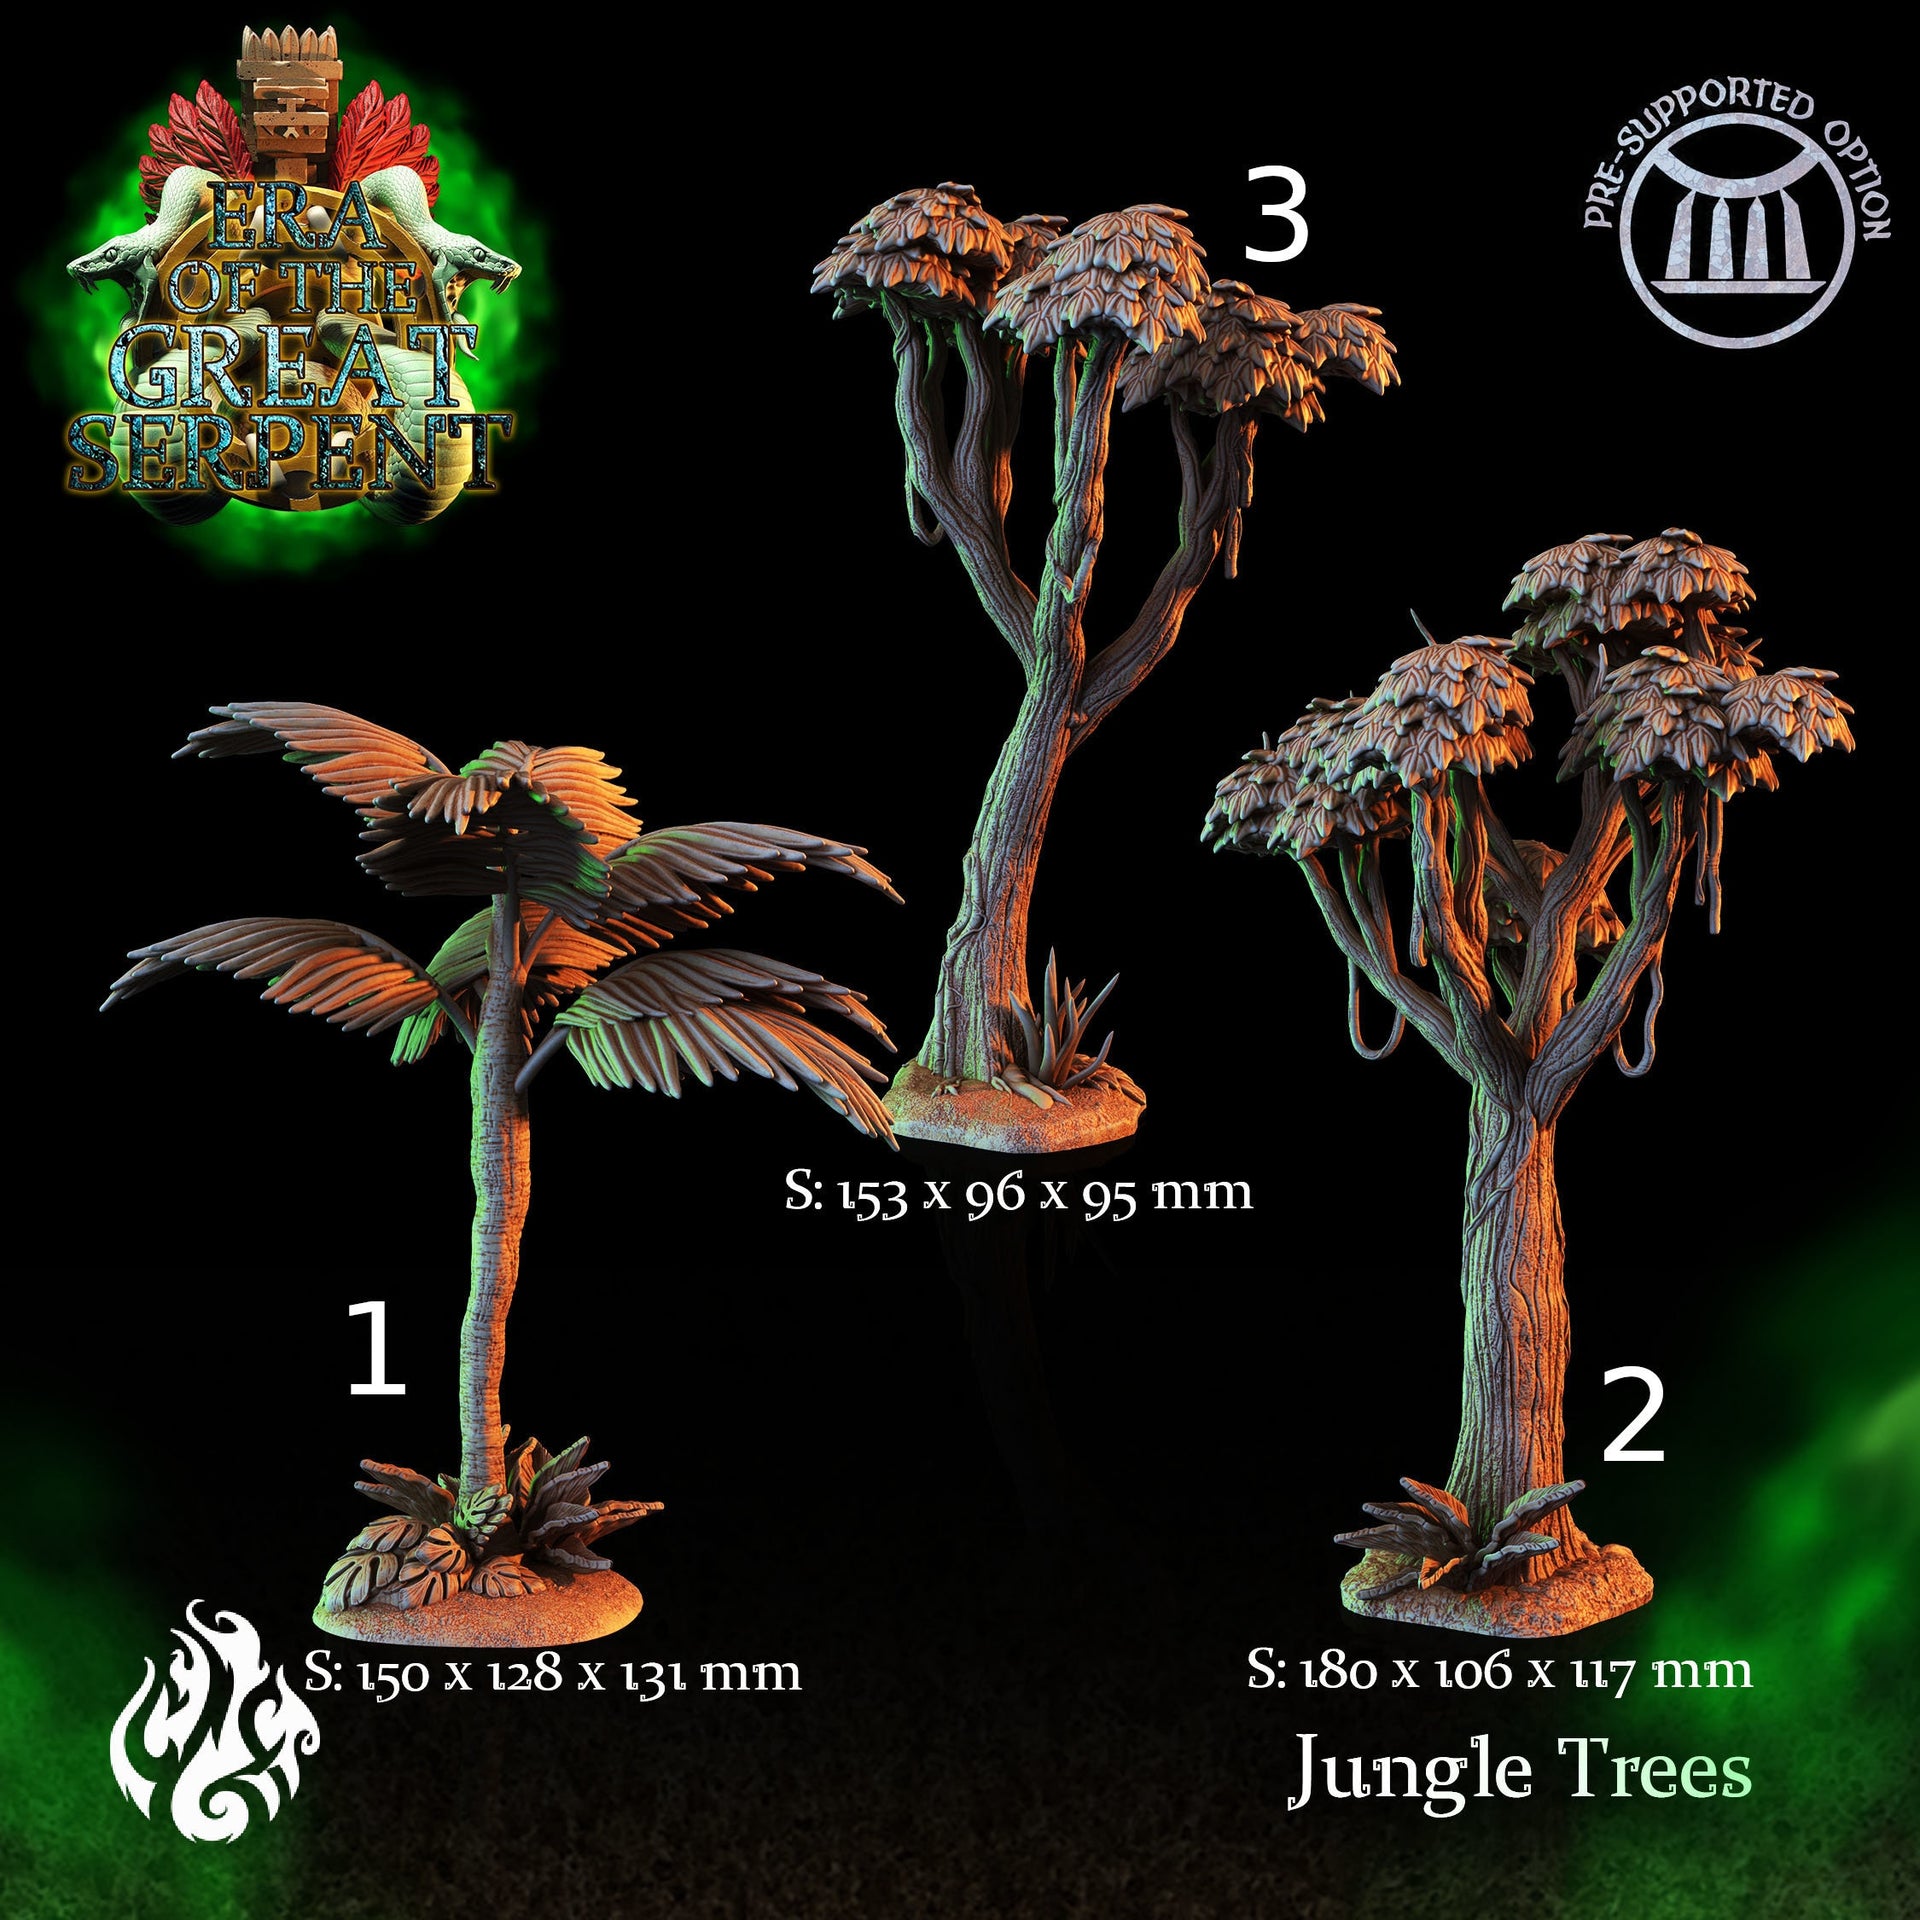 Jungle Trees - Era of the Great Serpent 